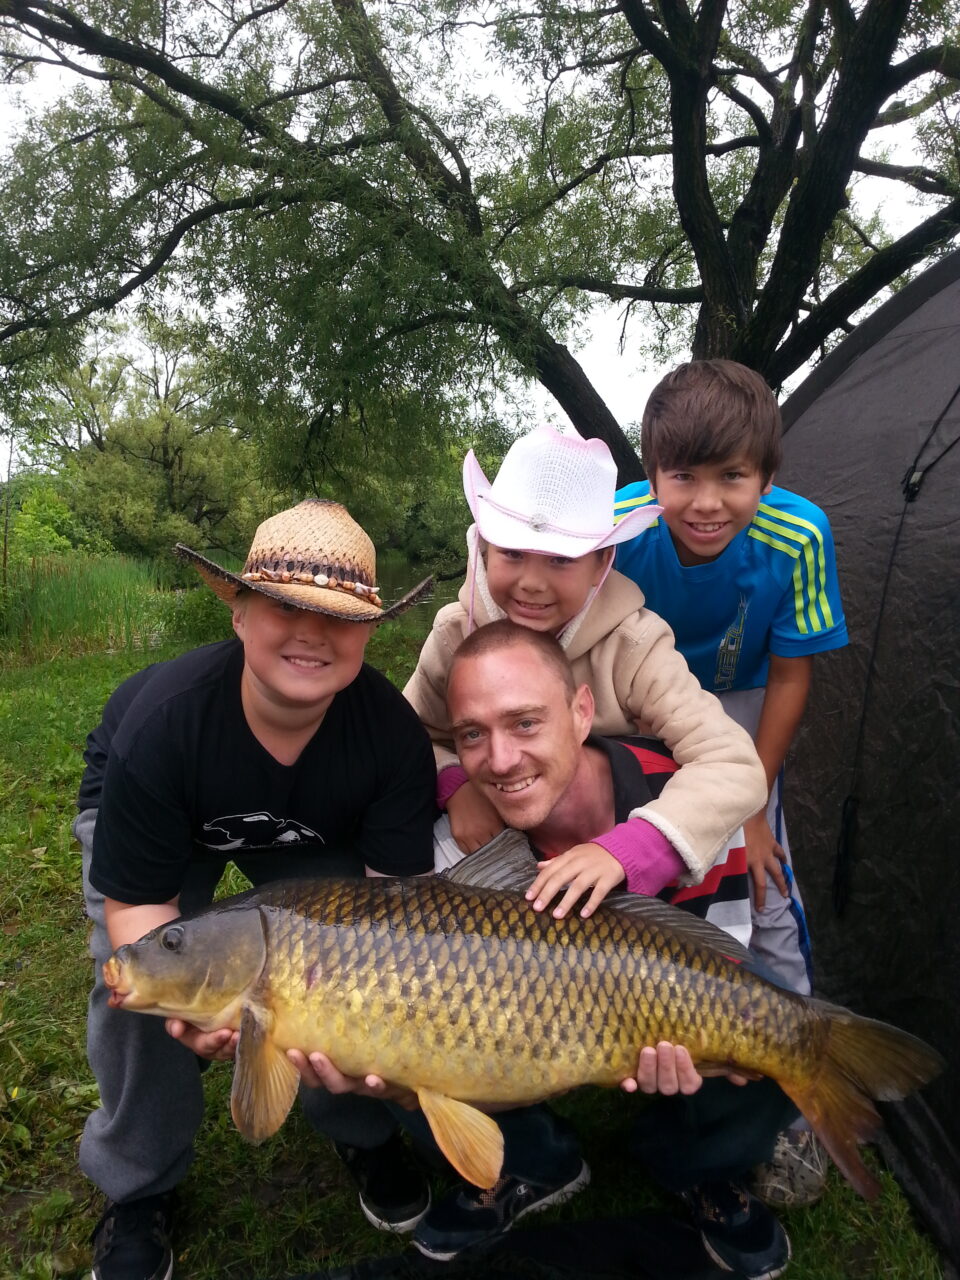 A man holding a fish with 3 children smiling beside him